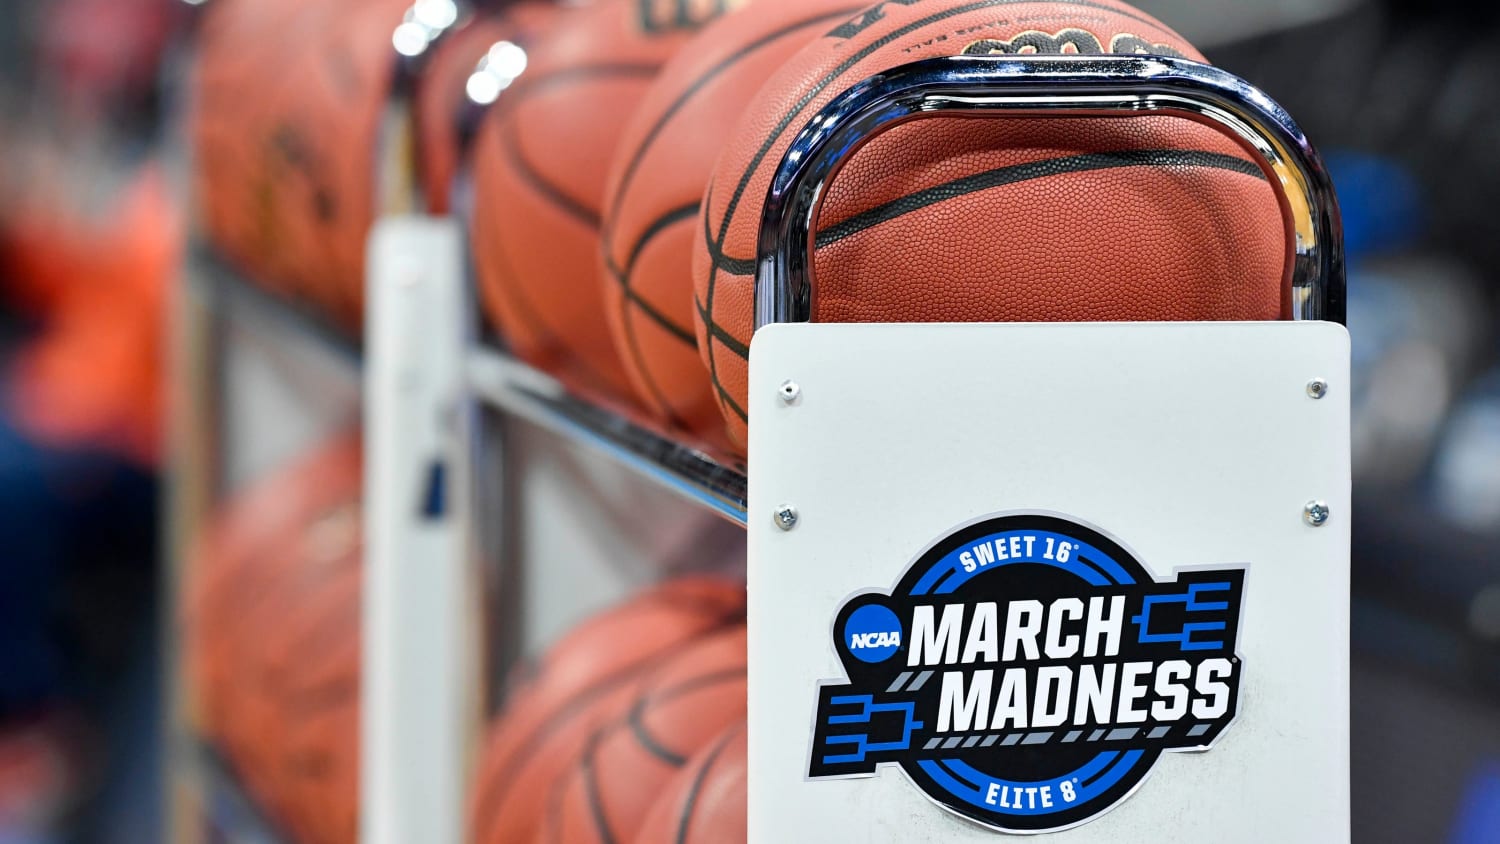 Sports books in Las Vegas are getting creative to offset March Madness betting losses